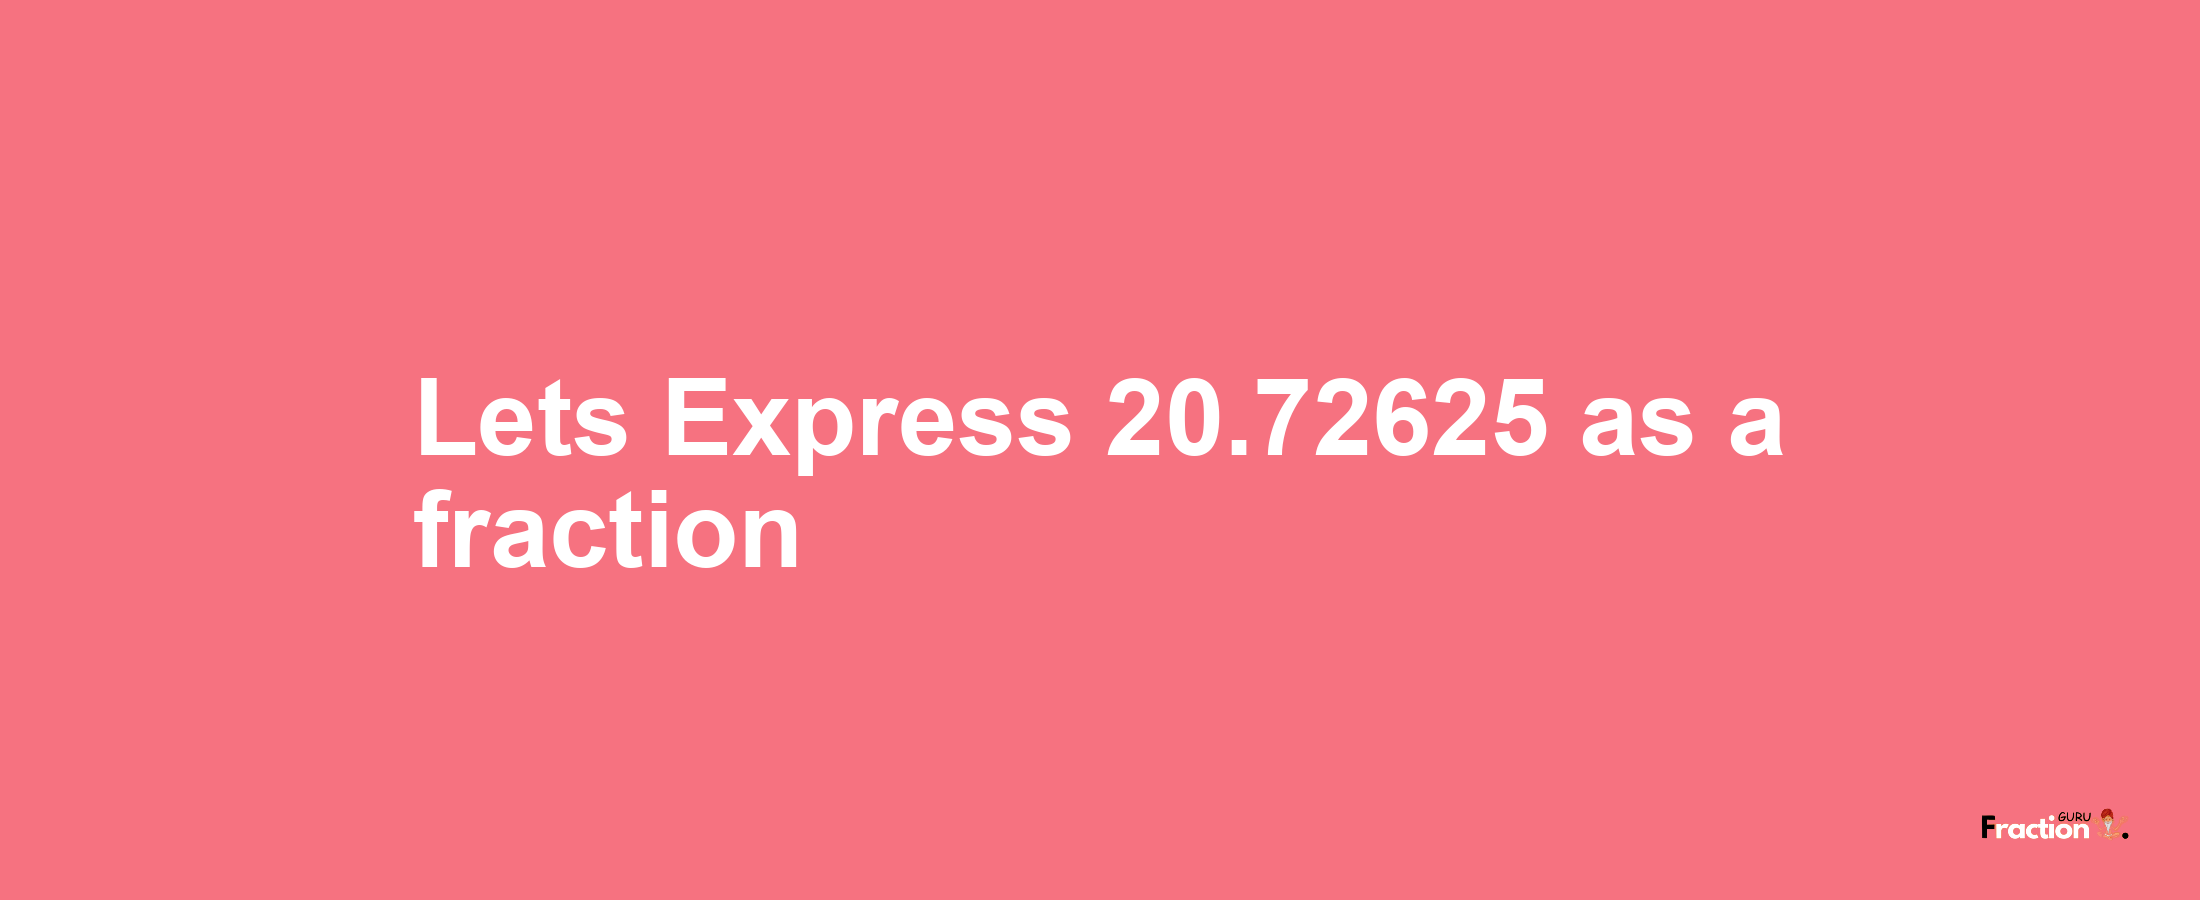 Lets Express 20.72625 as afraction